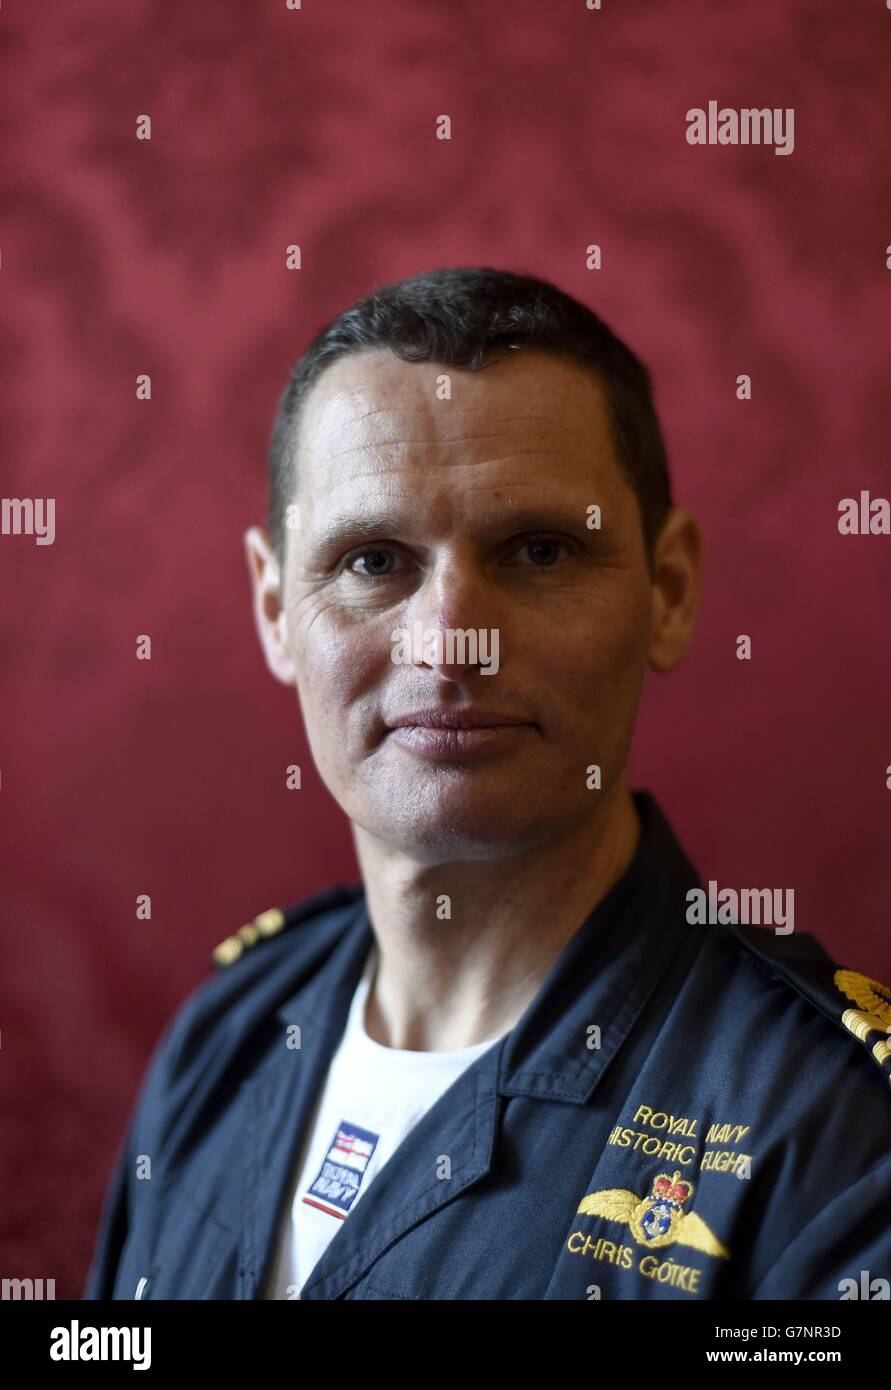 Lieutenant Commander Christopher Torben Gotke of the Royal Navy after he was named as being awarded the Air Force Cross (AFC) during an event at Lancaster House, London where the latest Operational Honours and Awards was announced. Stock Photo